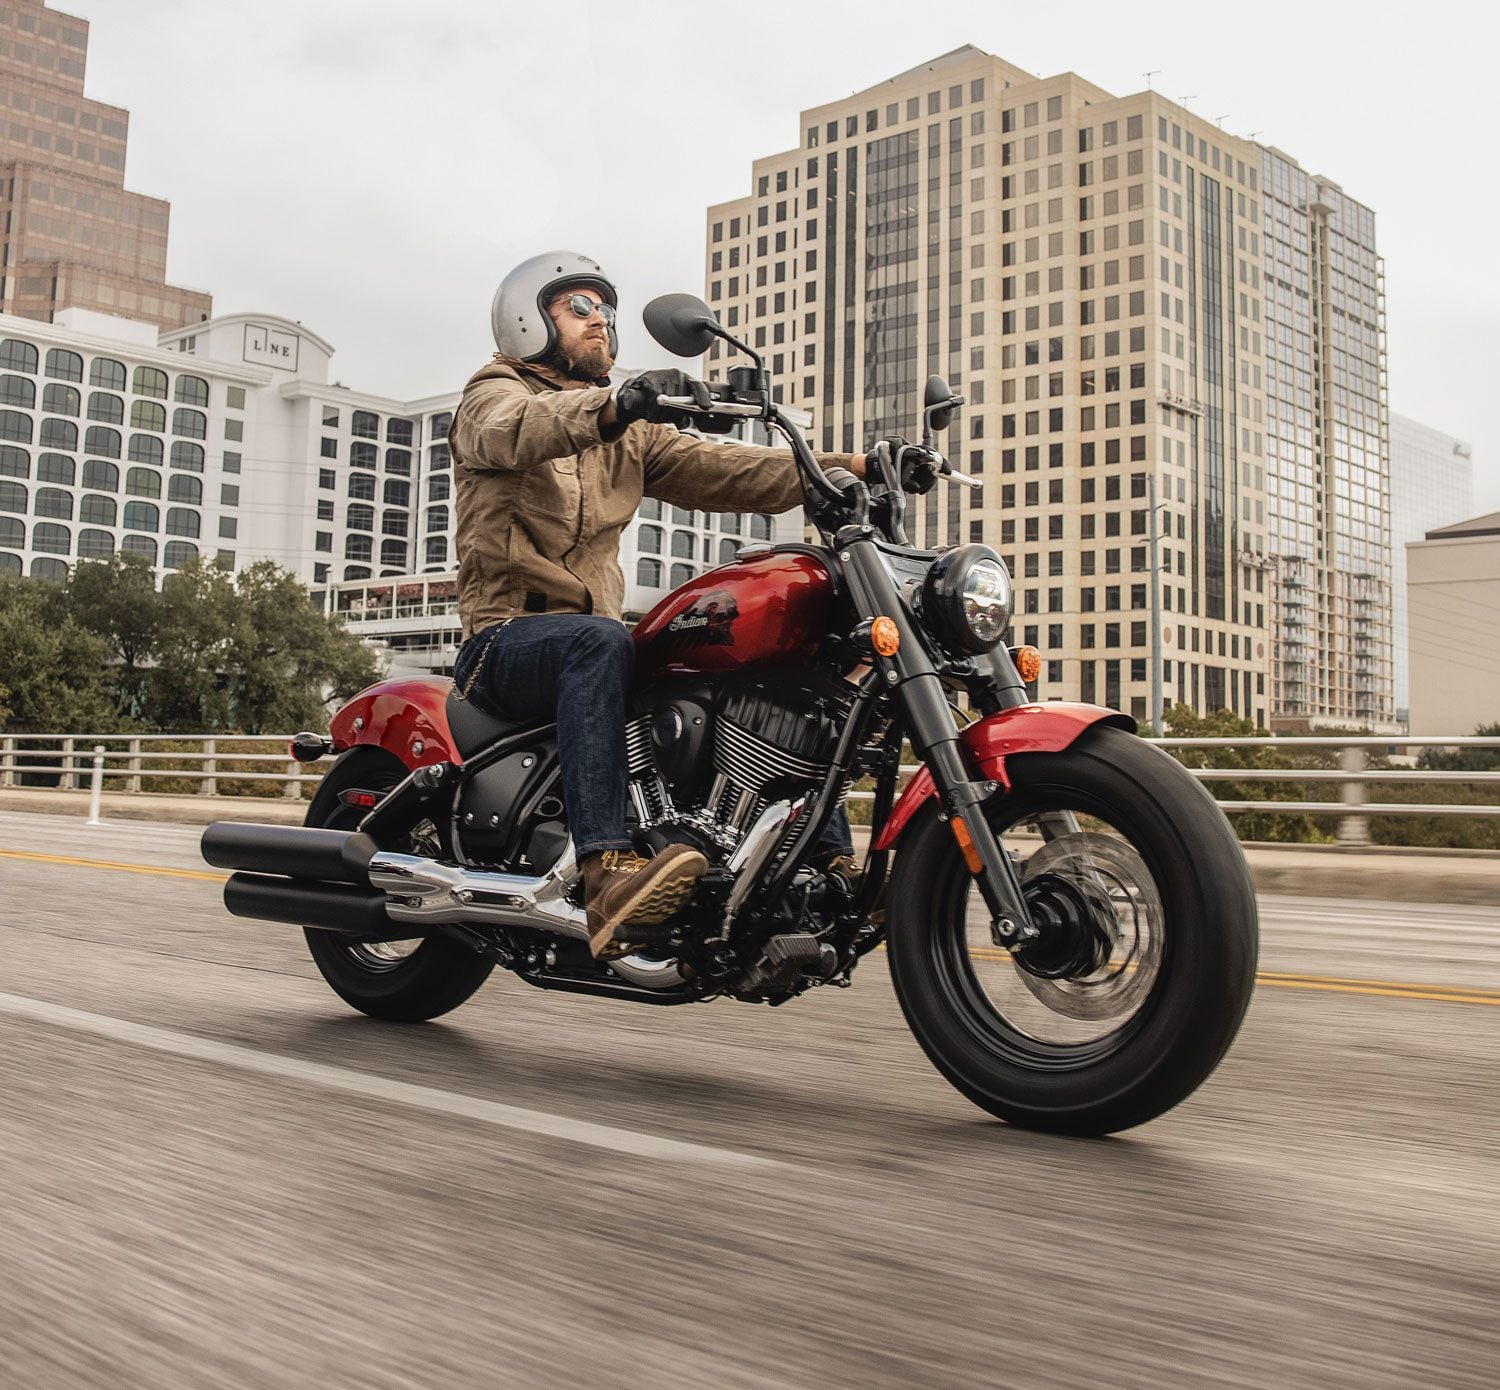 The Chief Bobber rolls on 16-inch fat tires and spoked wheels and adds a mini-ape handlebar and forward controls.